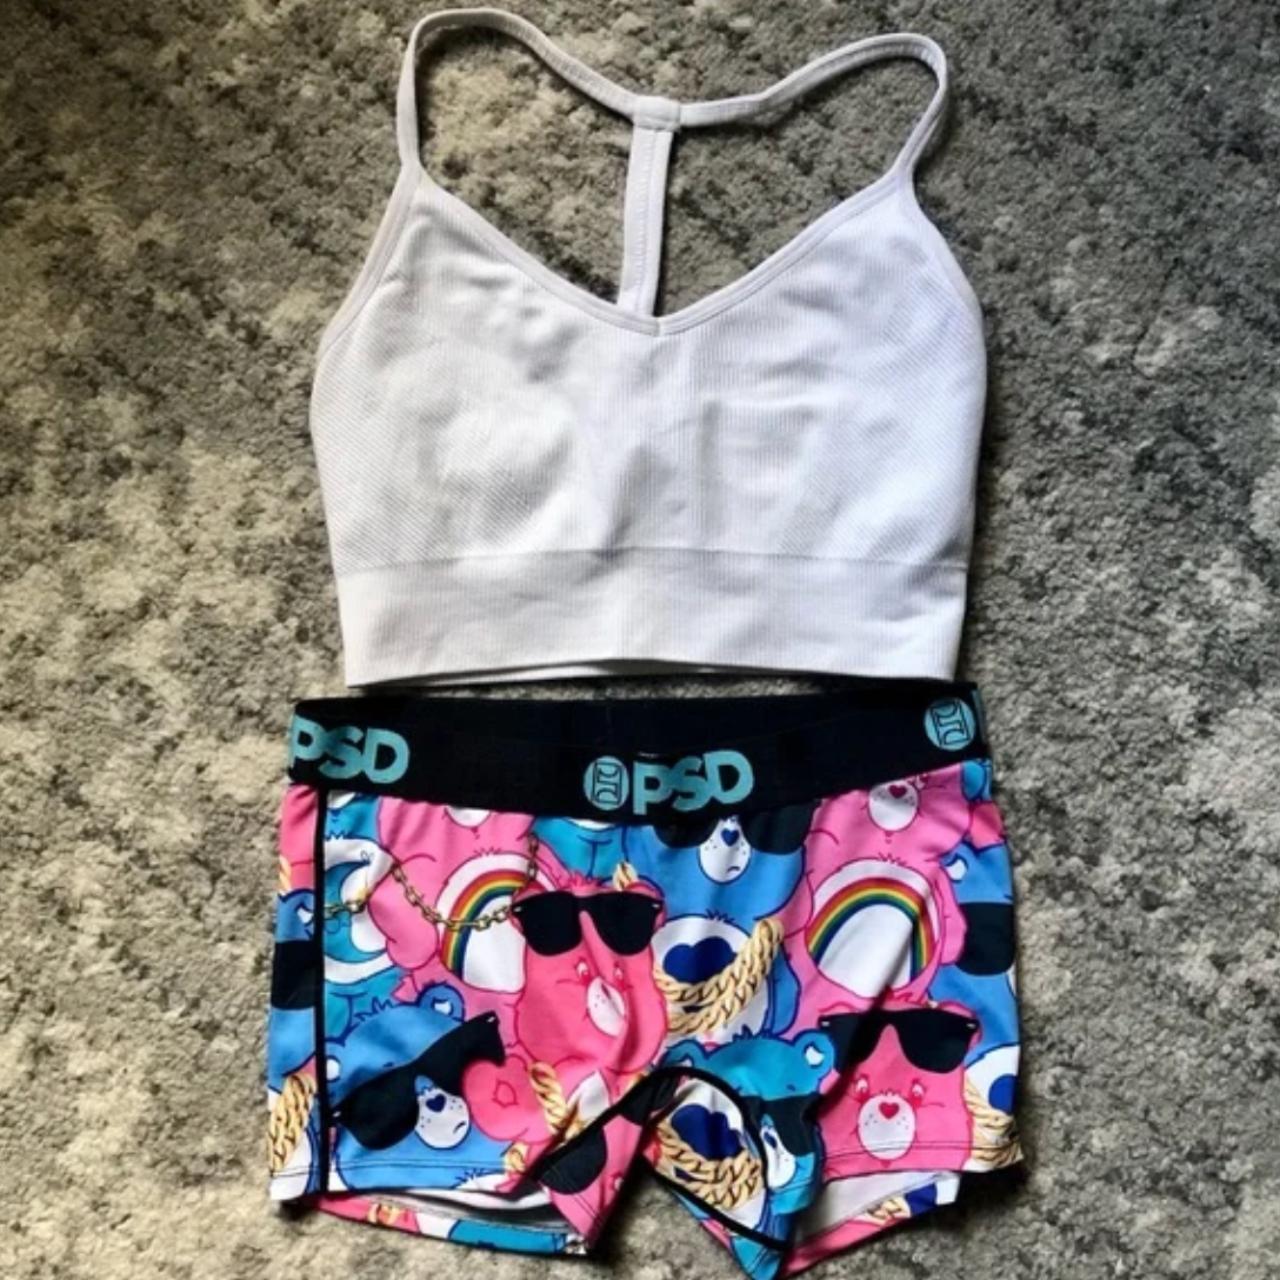 PSD Care Bears Shorts/Underwear and White Sports